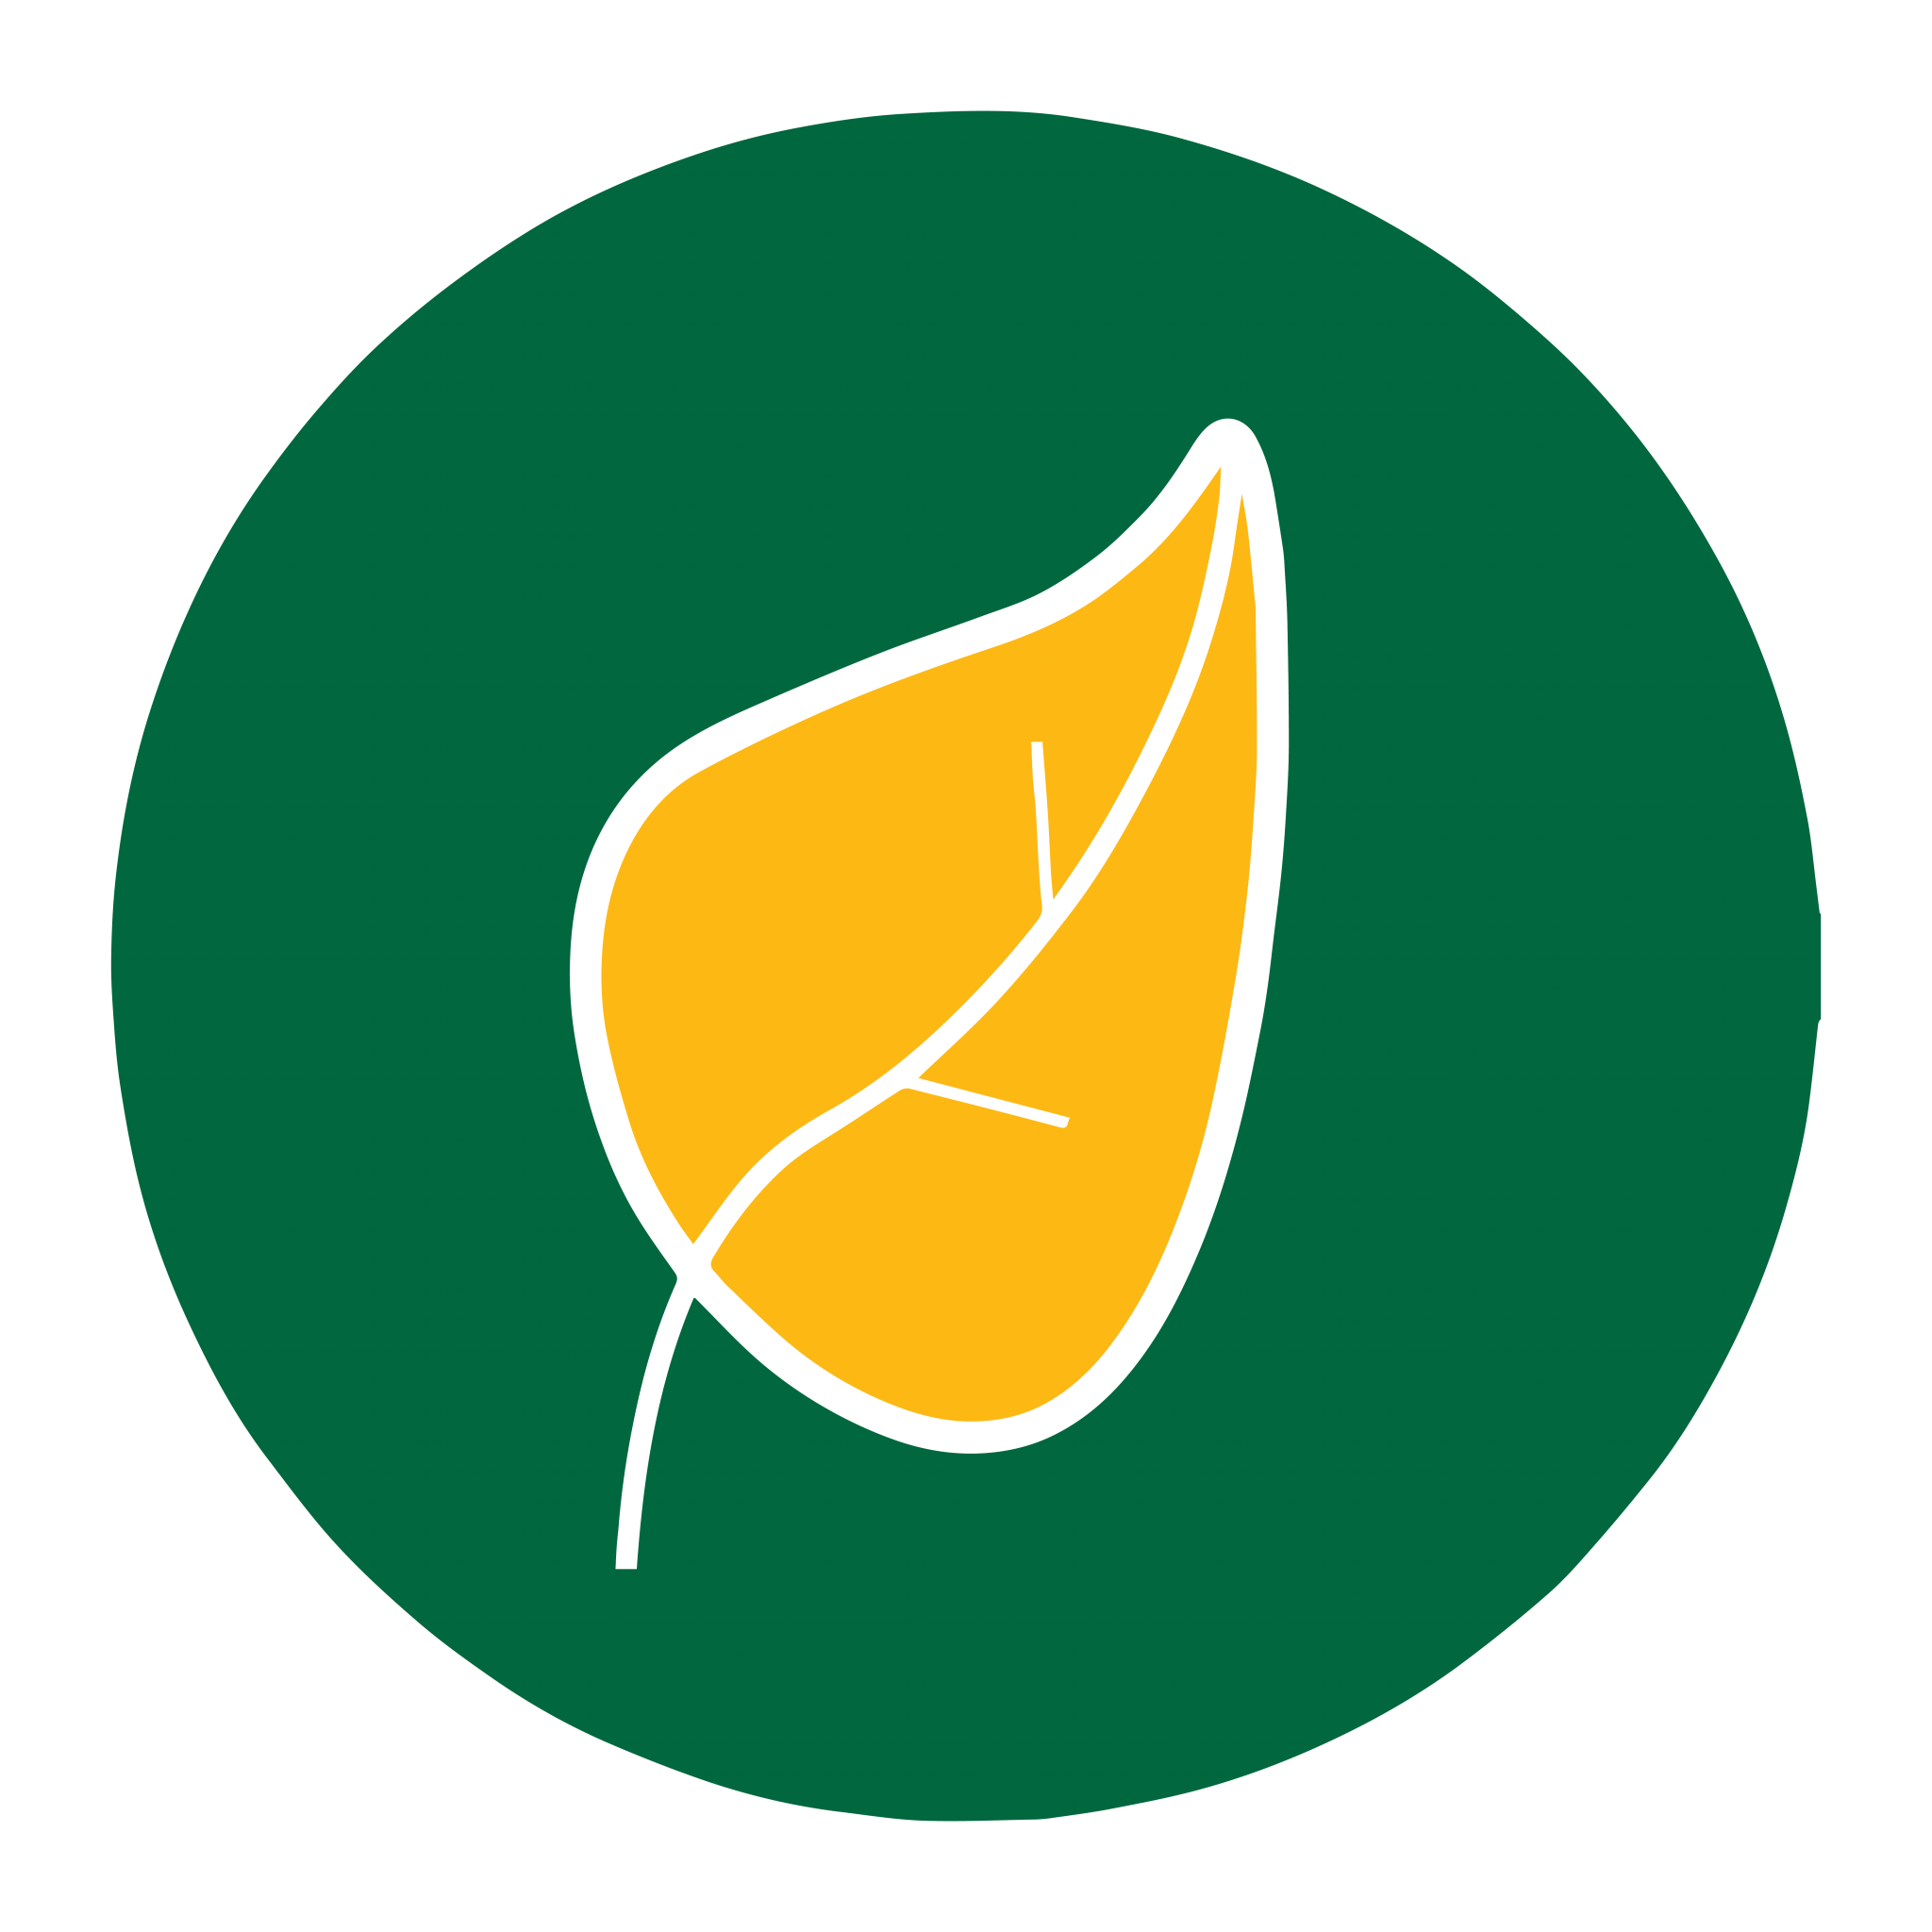 A yellow leaf icon with a white outline and veins, set against a dark green circular background, embodies the spirit of Environmental Leaders.